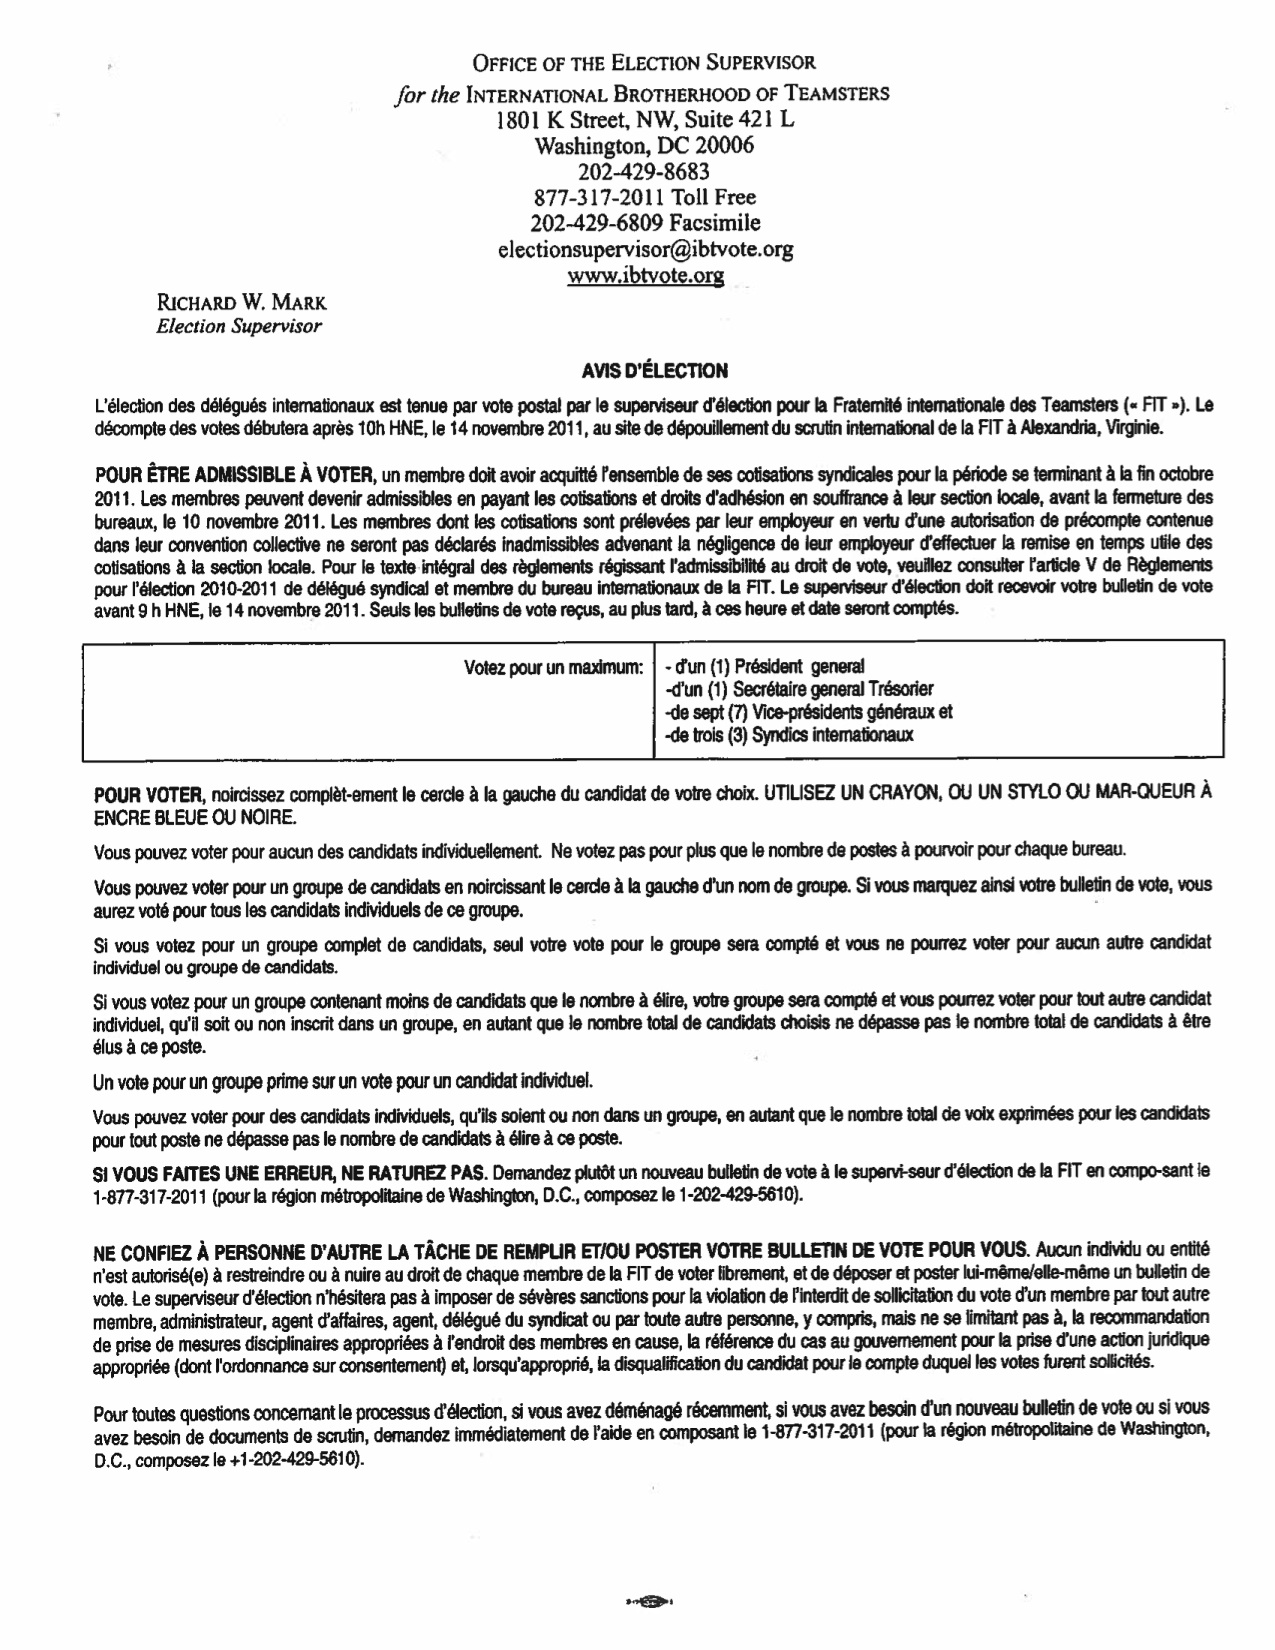 Notice of Election 2011 (French)-20110922